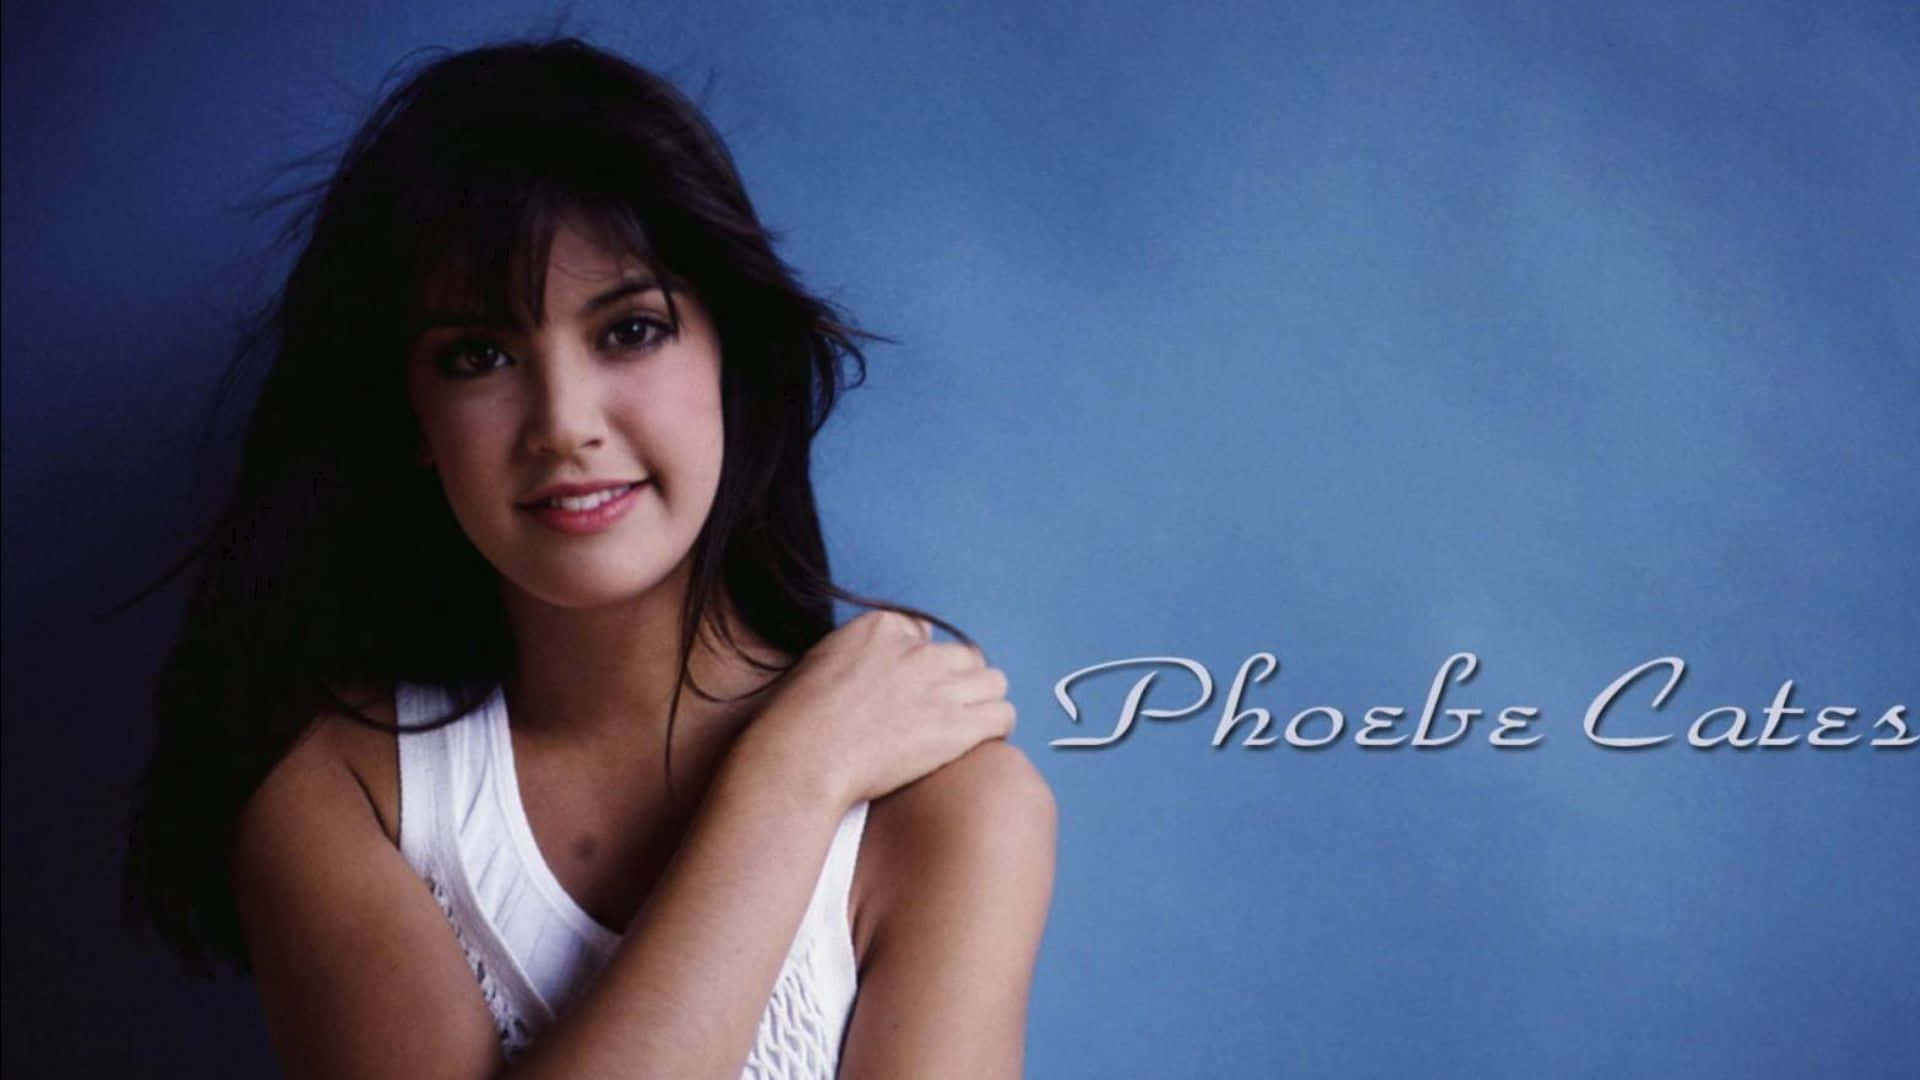 Phoebe Cates in a Stunning Portrait Wallpaper